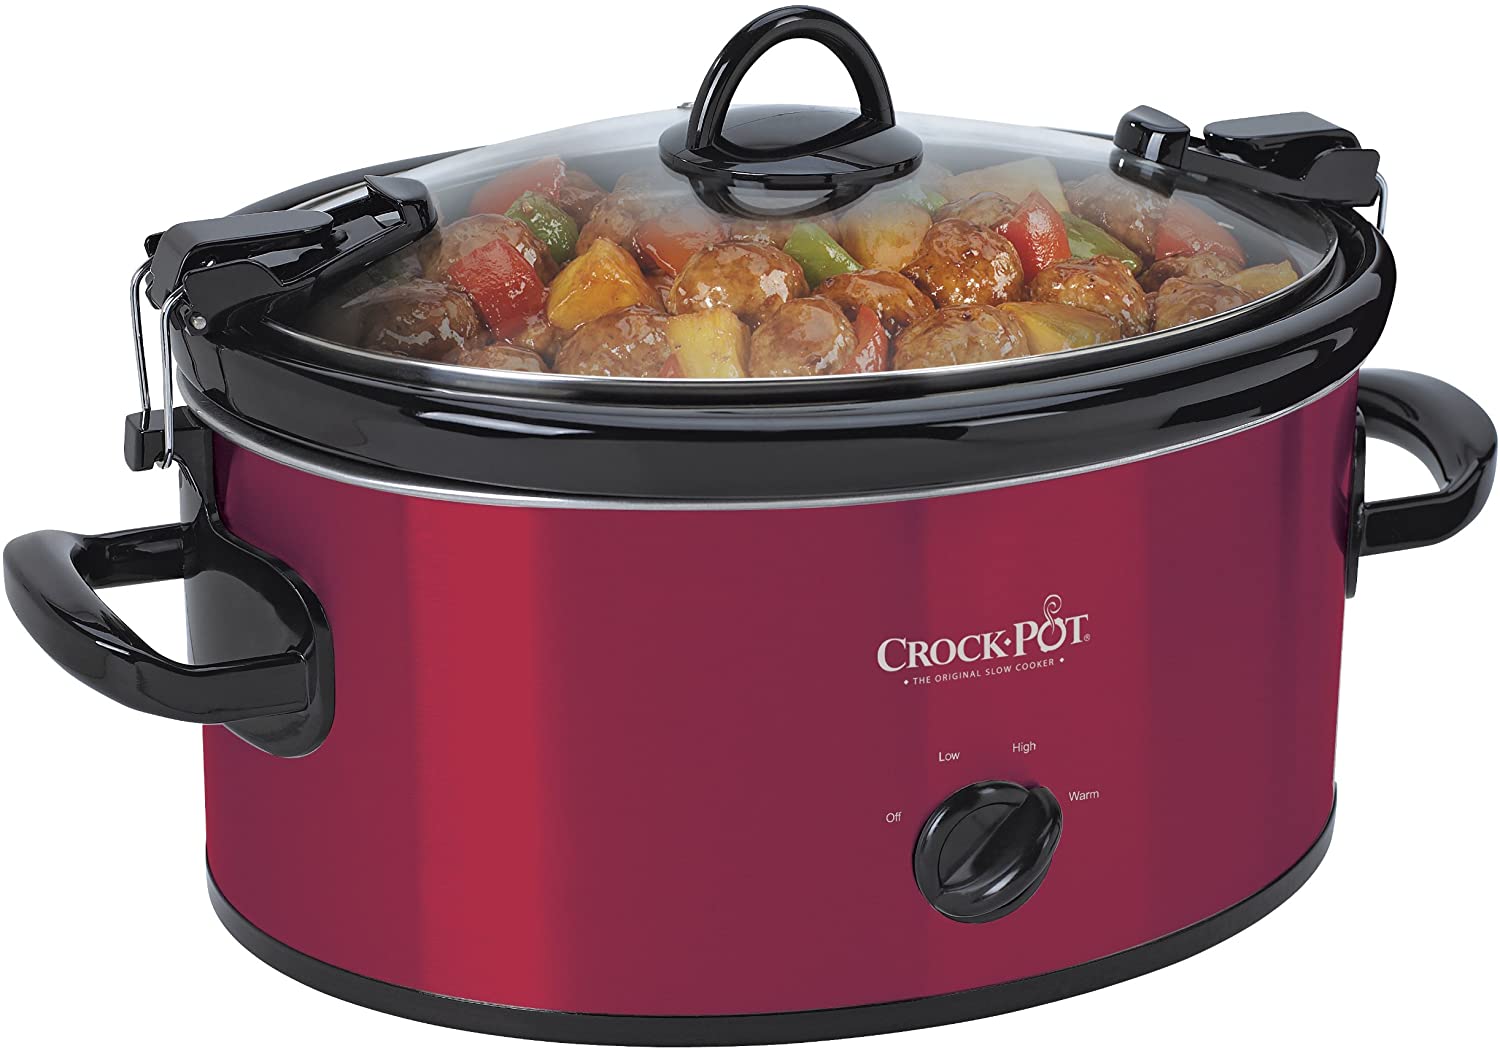 Review of Crock-Pot 6-Quart Cook & Carry Oval Manual Portable Slow Cooker, Red - SCCPVL600-R